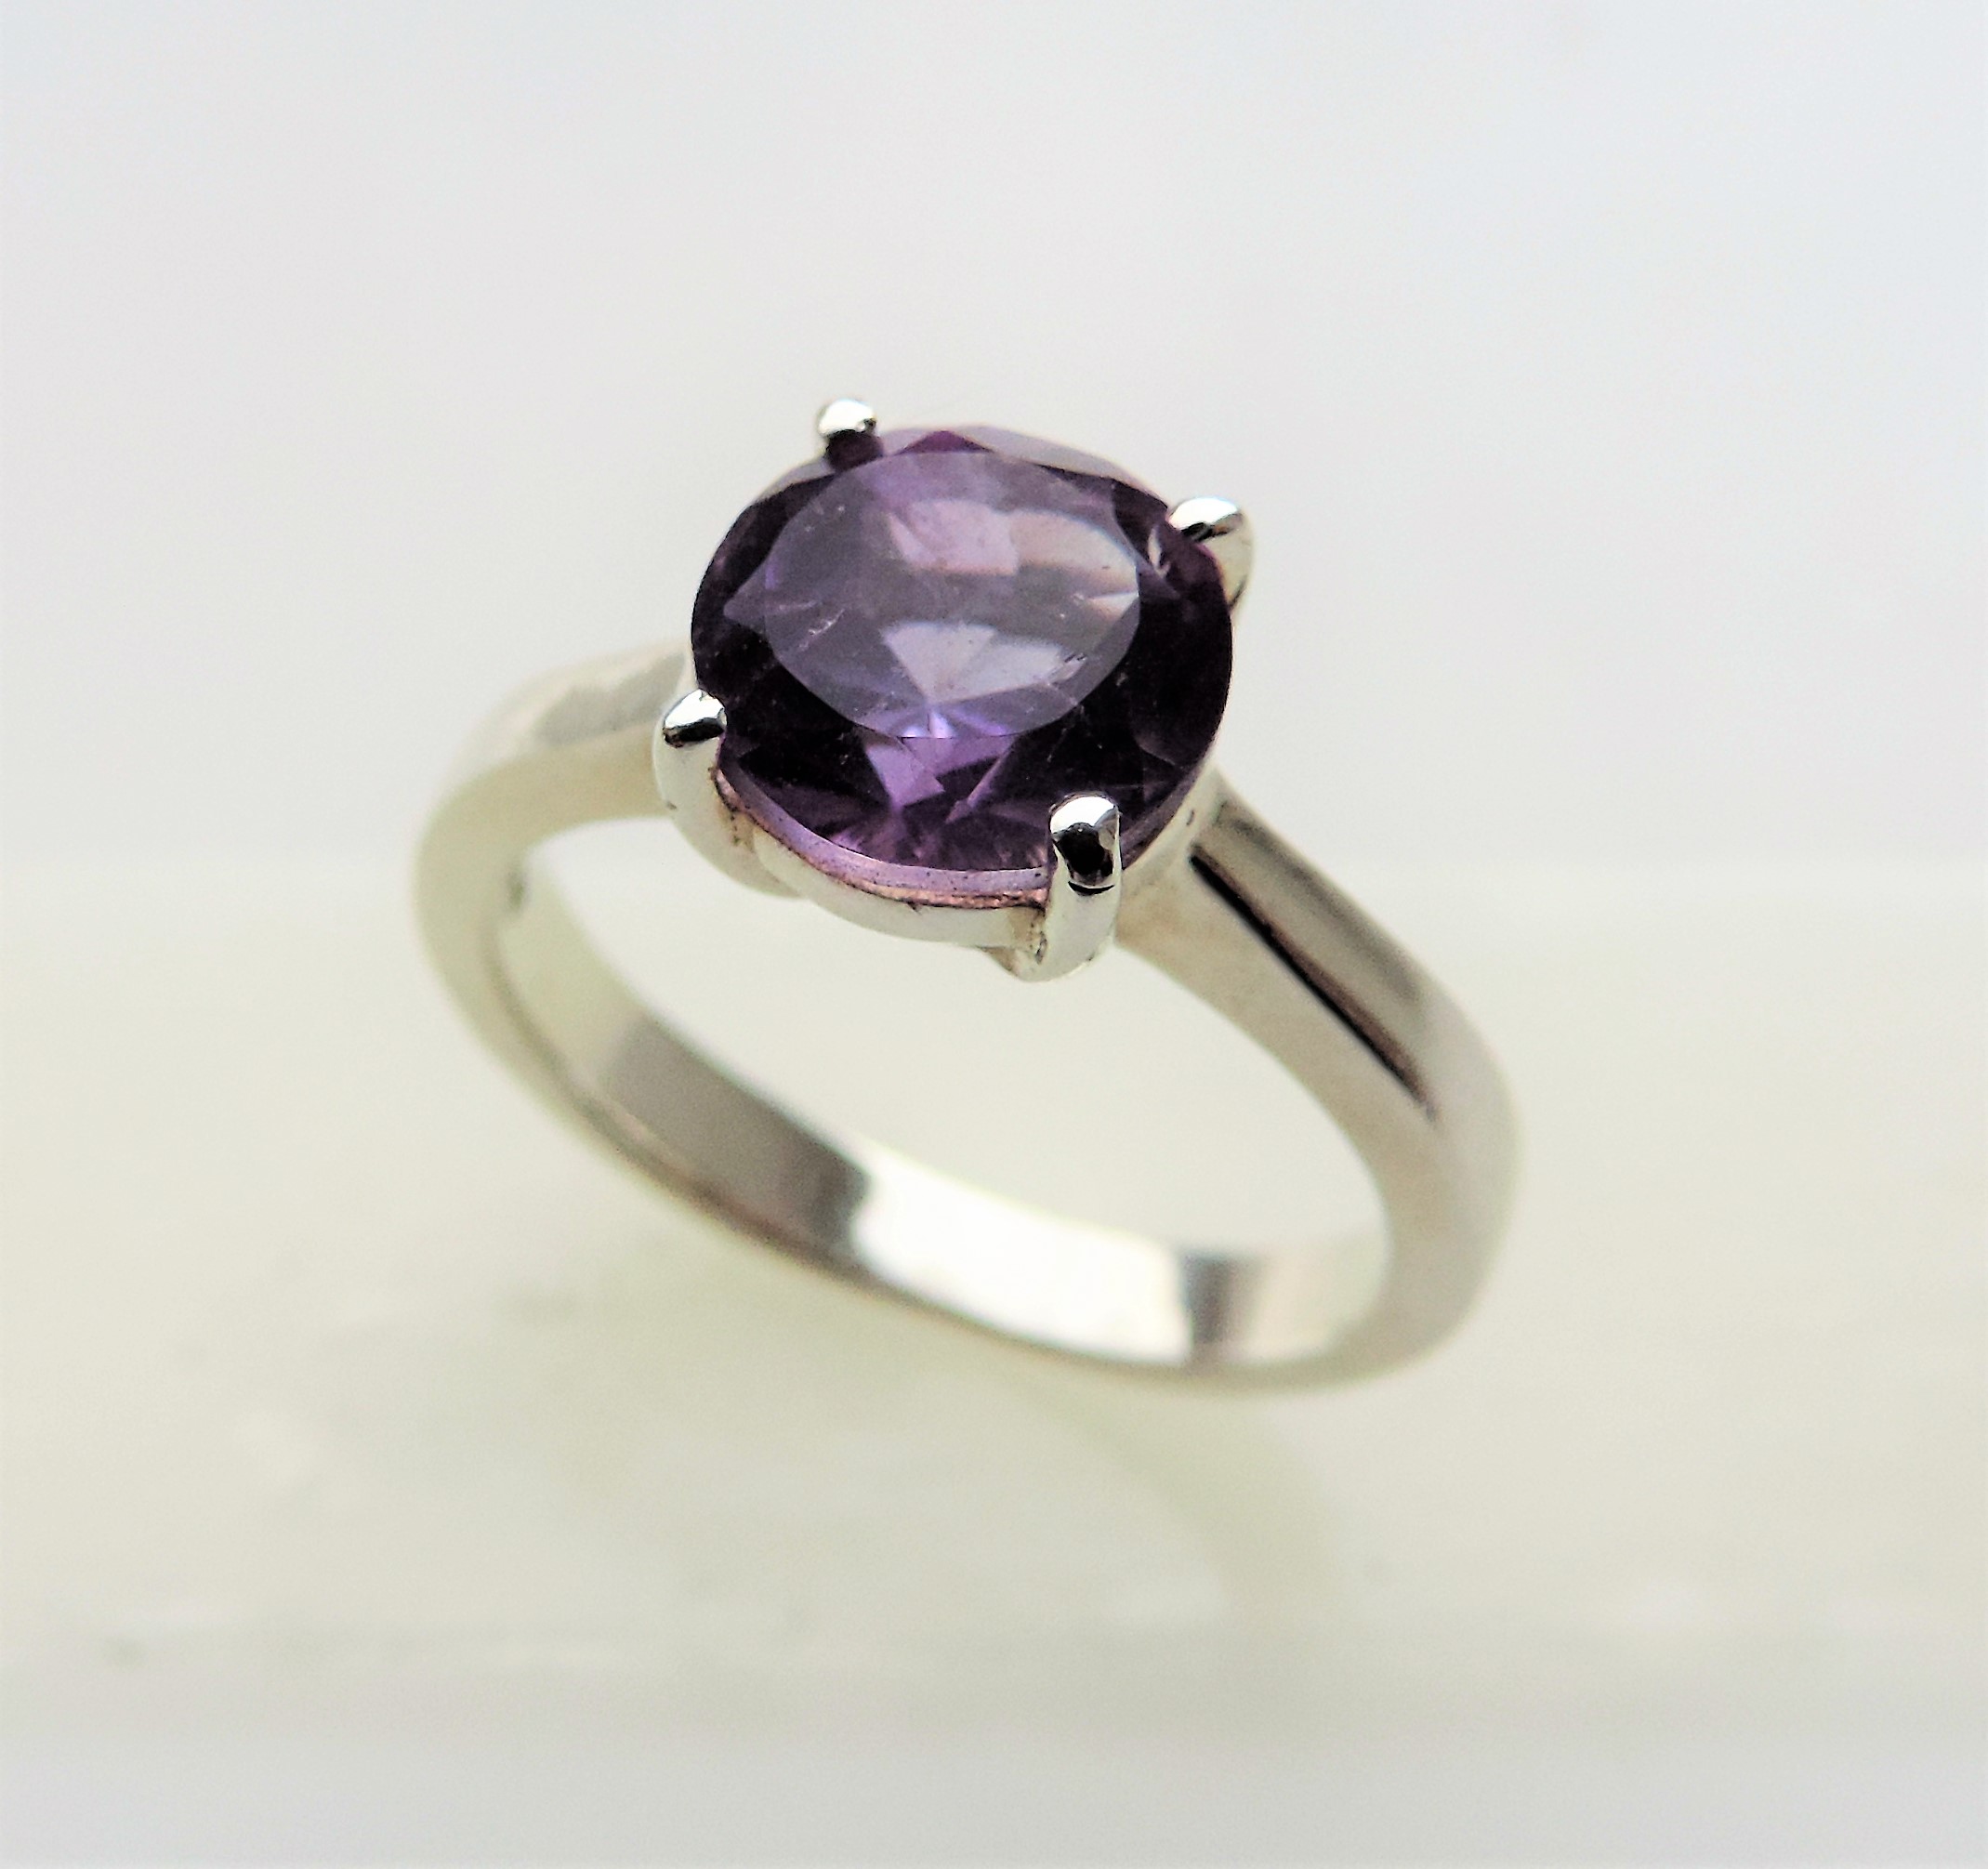 1.8 carat Amethyst Solitaire Ring